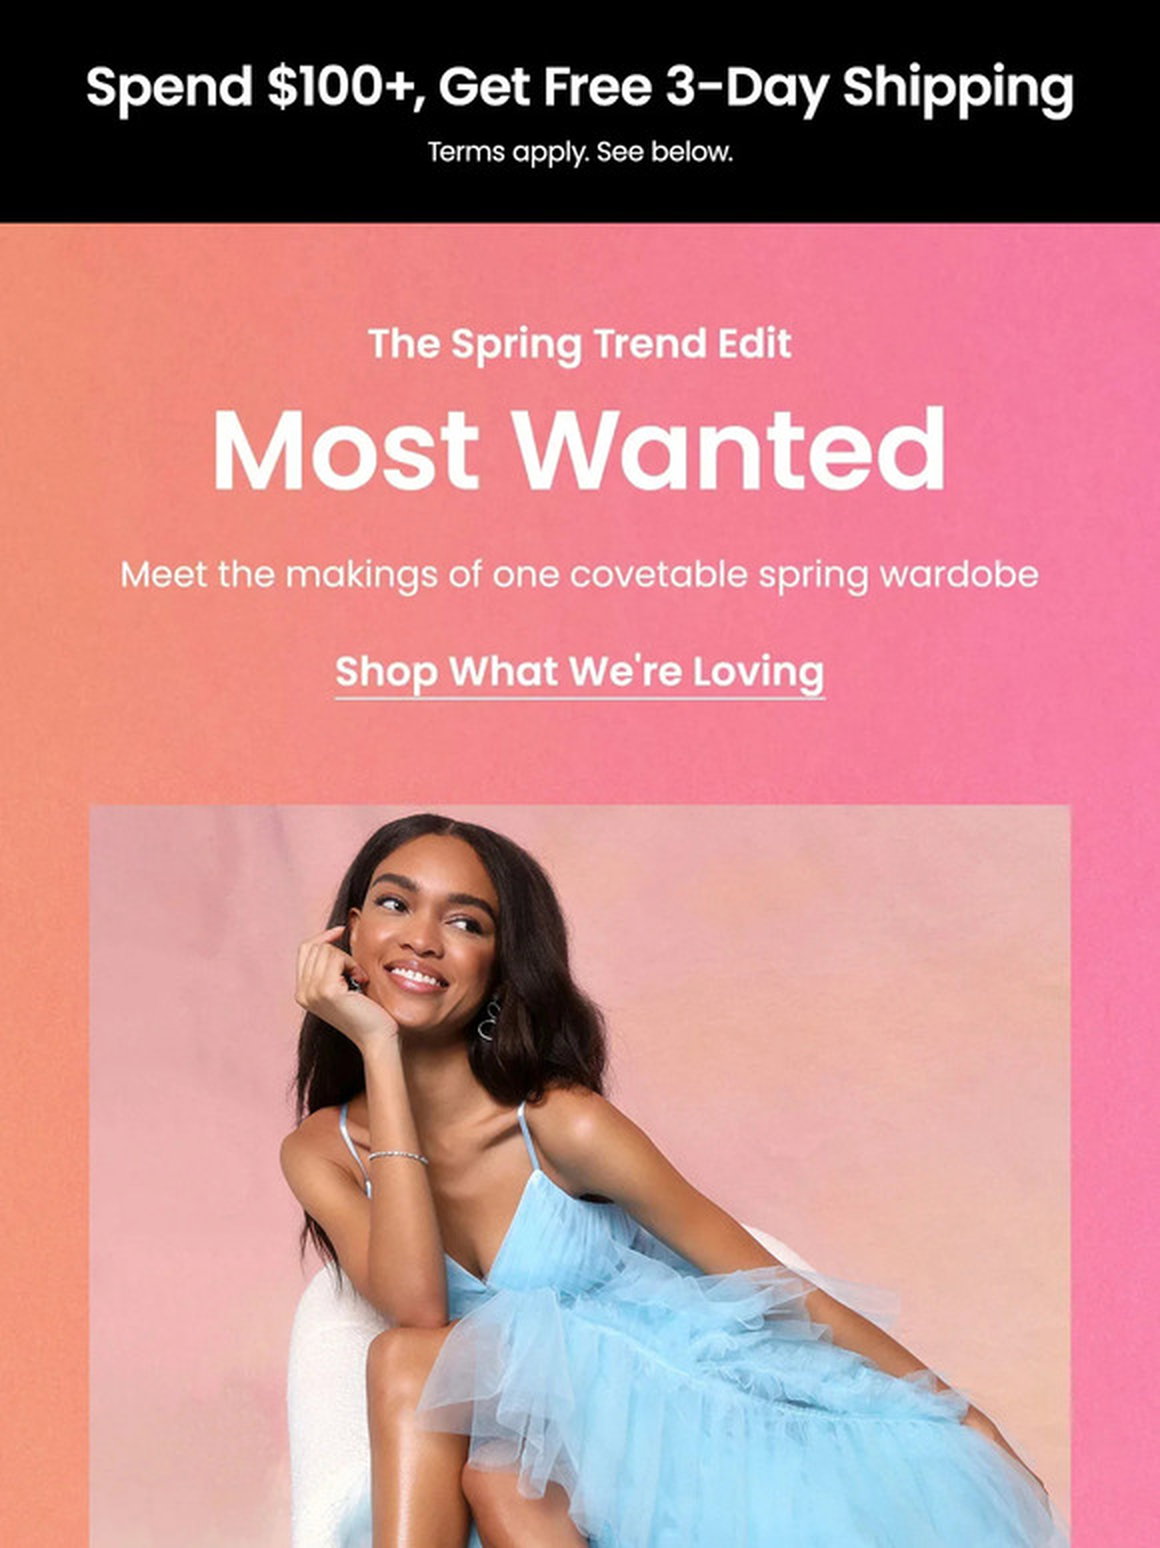 Most Wanted, Most Needed for Spring